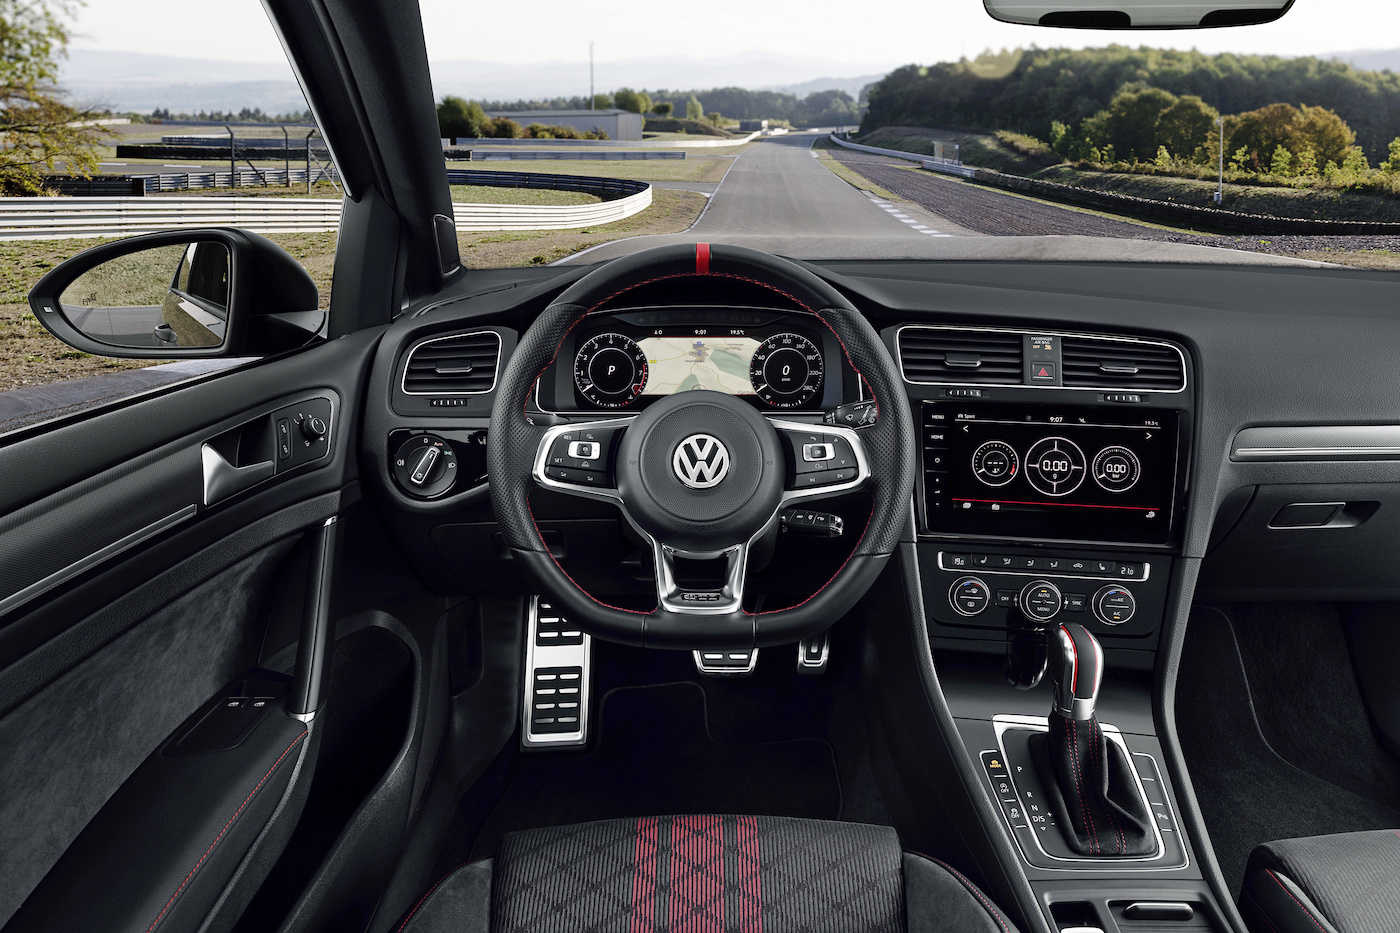 Volkswagen Golf GTI TCR Specia Edition driver's view